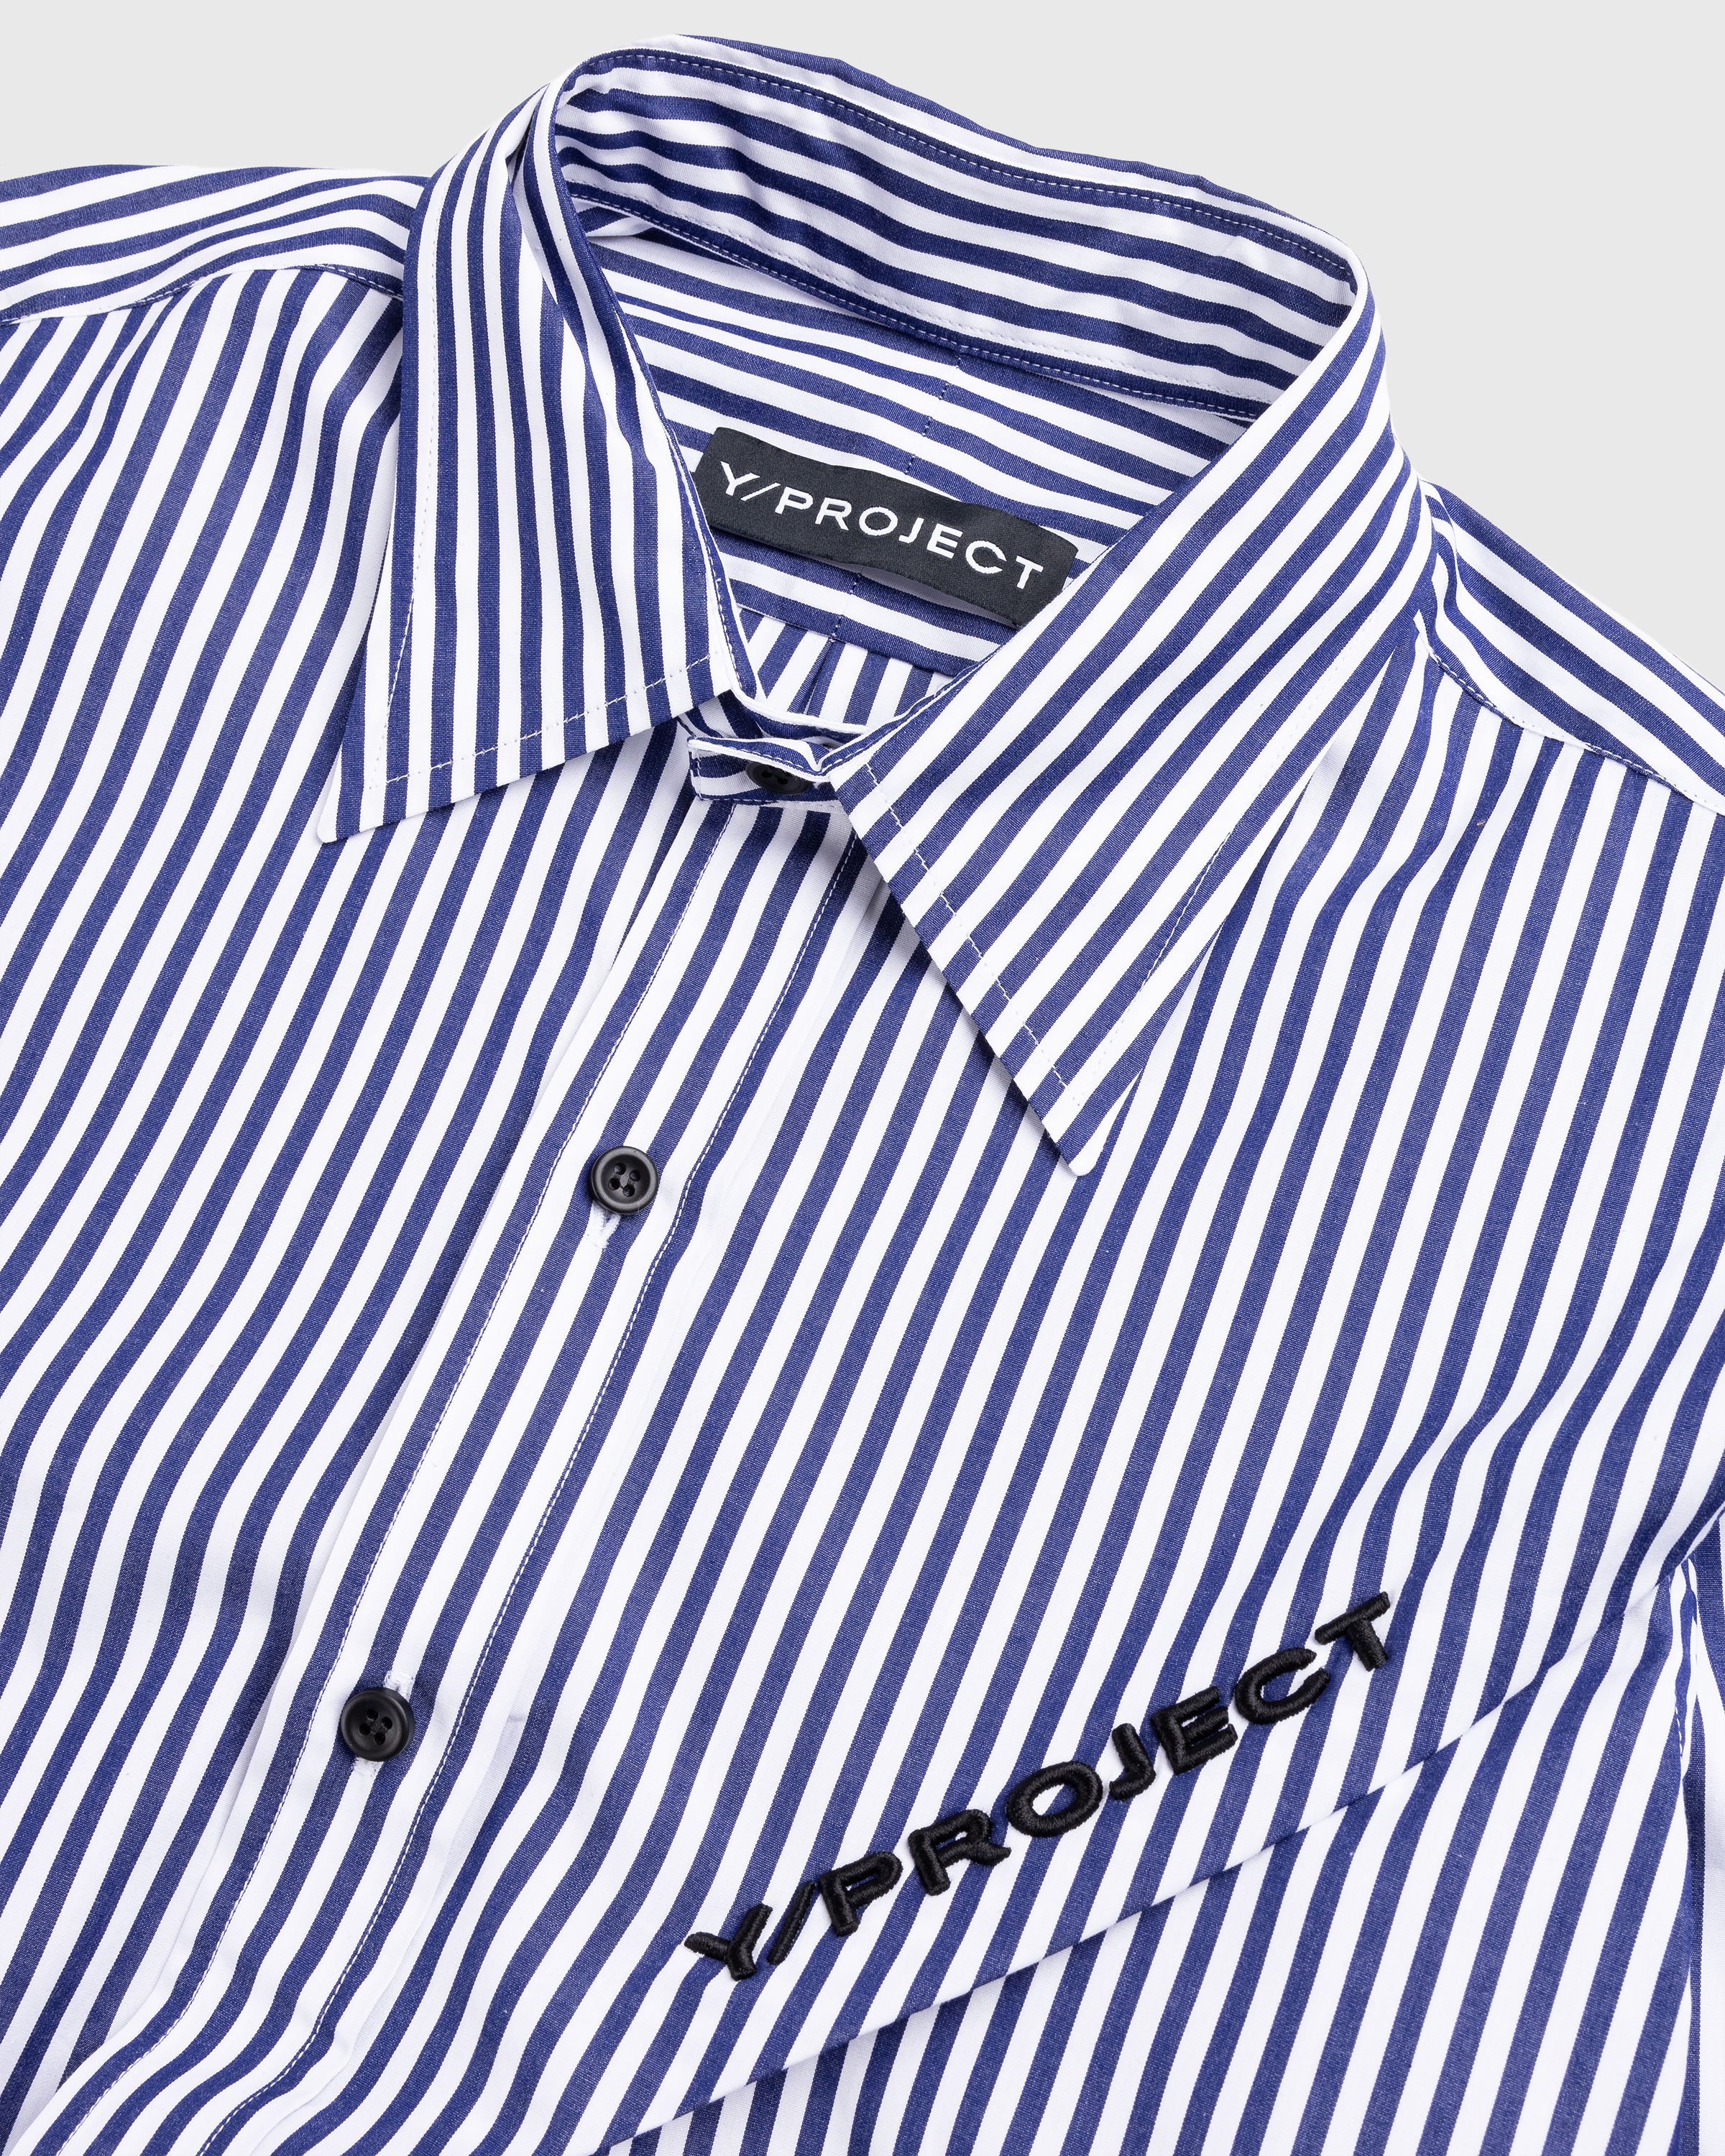 Y/Project - Pinched Logo Stripe Shirt Navy/White - Clothing - Blue - Image 5